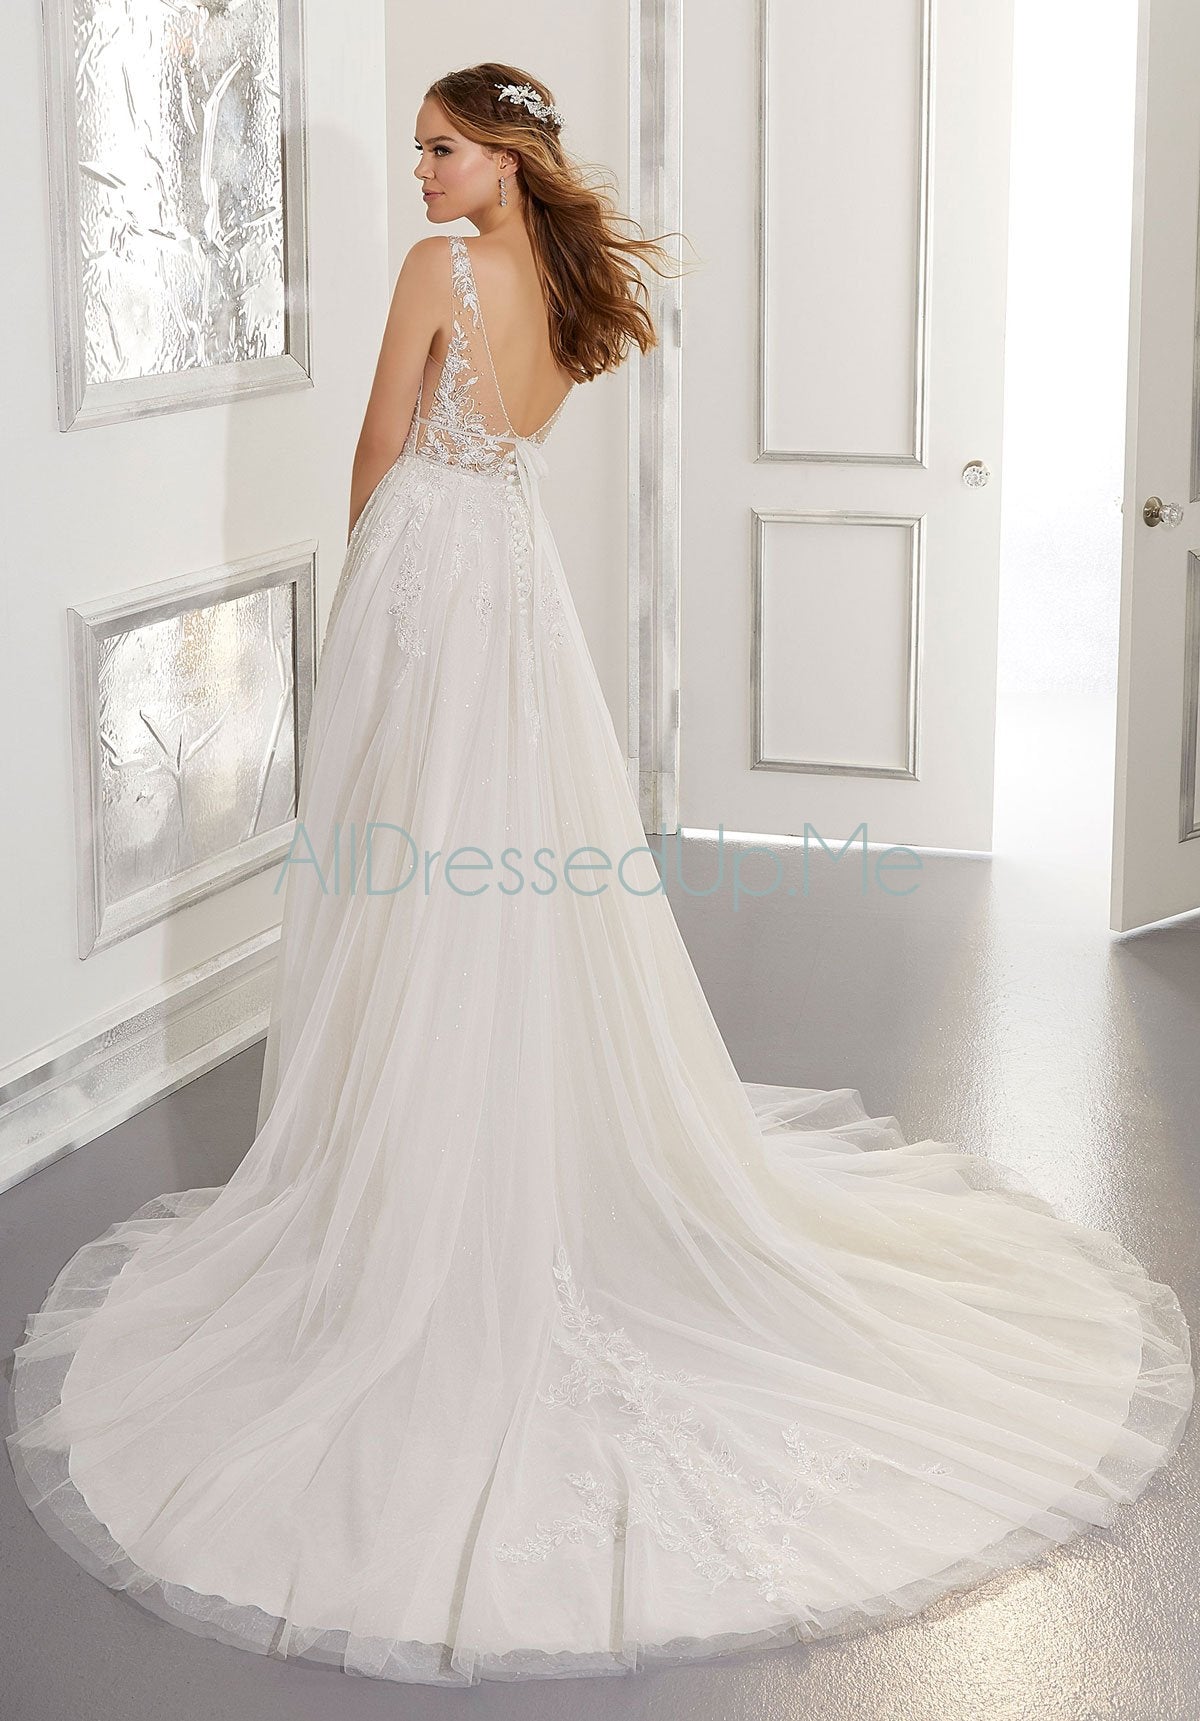 Blu - Angela - 5879 - 5879W - Cheron's Bridal, Wedding Gown - Morilee Blu - - Wedding Gowns Dresses Chattanooga Hixson Shops Boutiques Tennessee TN Georgia GA MSRP Lowest Prices Sale Discount